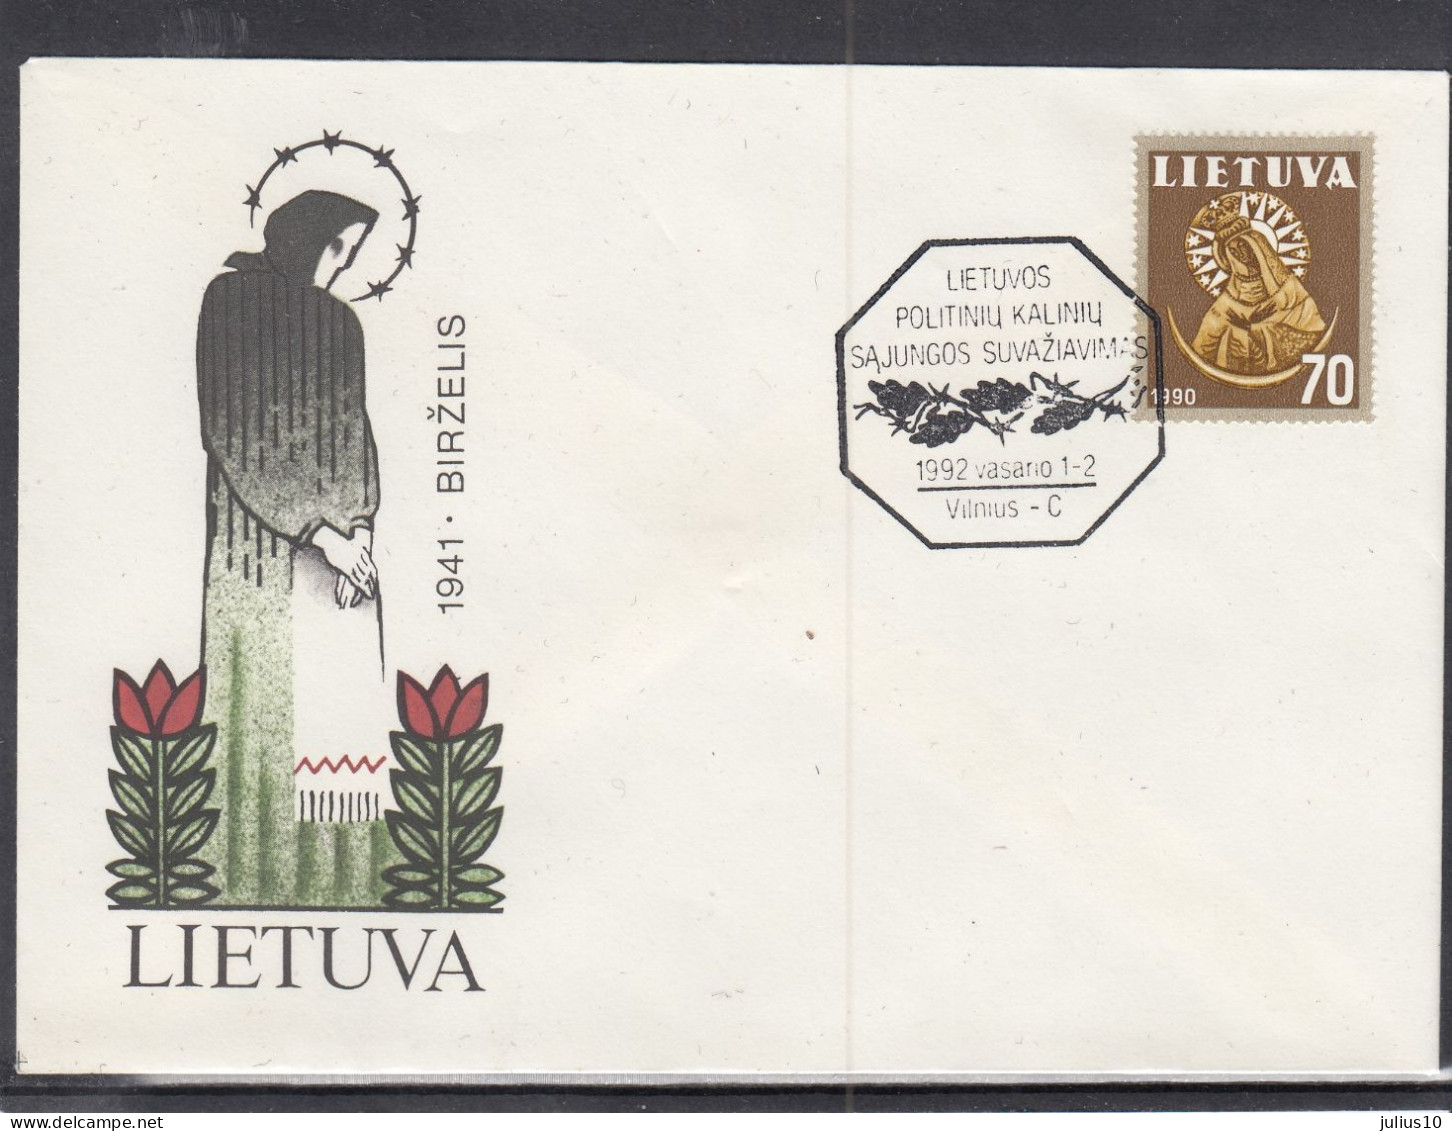 LITHUANIA 1992 Cover Special Cancel Political Prisoners Congress #LTV262 - Lithuania